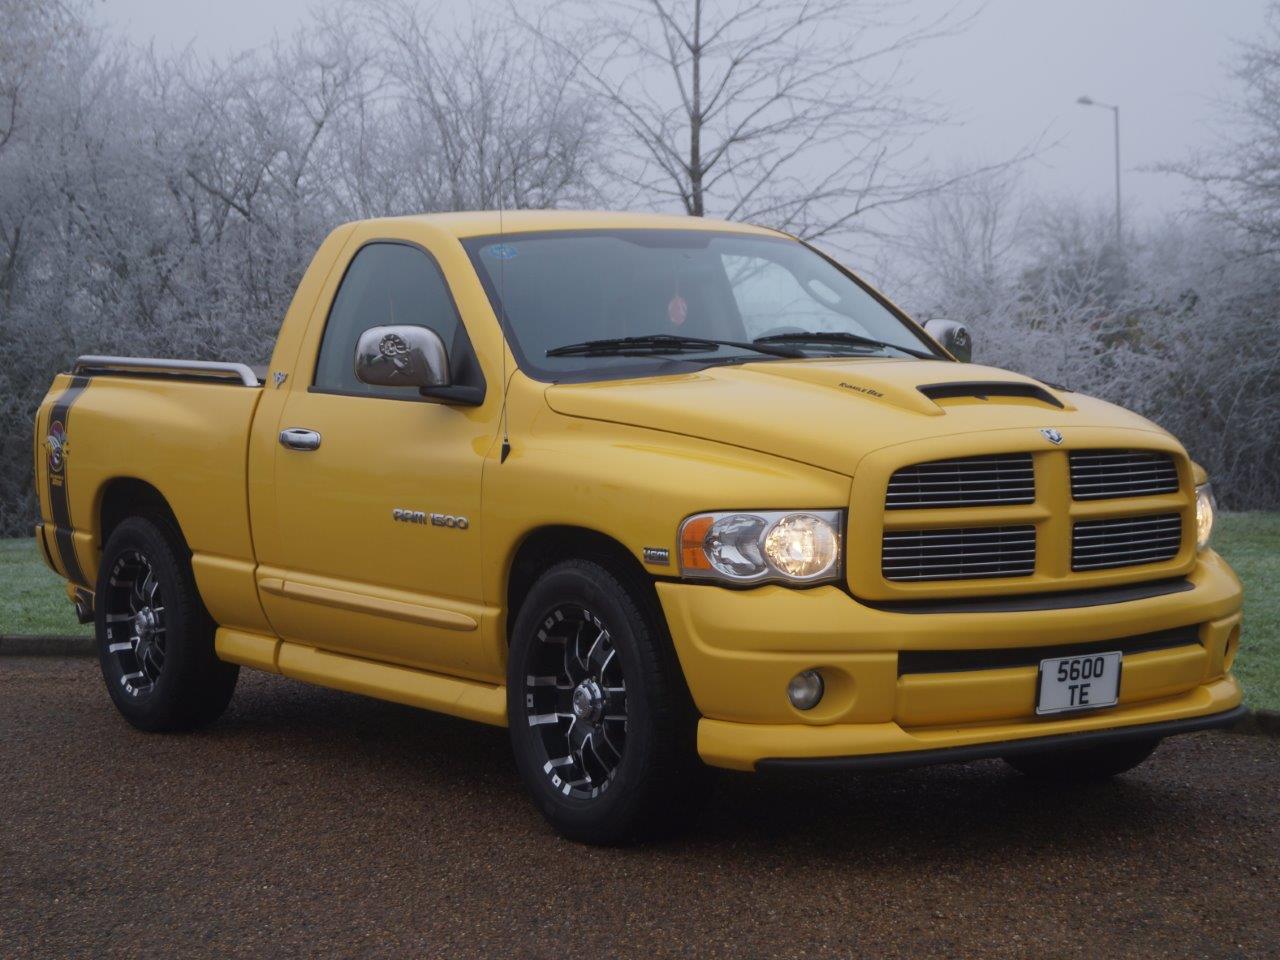 2004 Ram 1500 Rumble Bee Truck in Mint Condition Is Hot and Affordable -